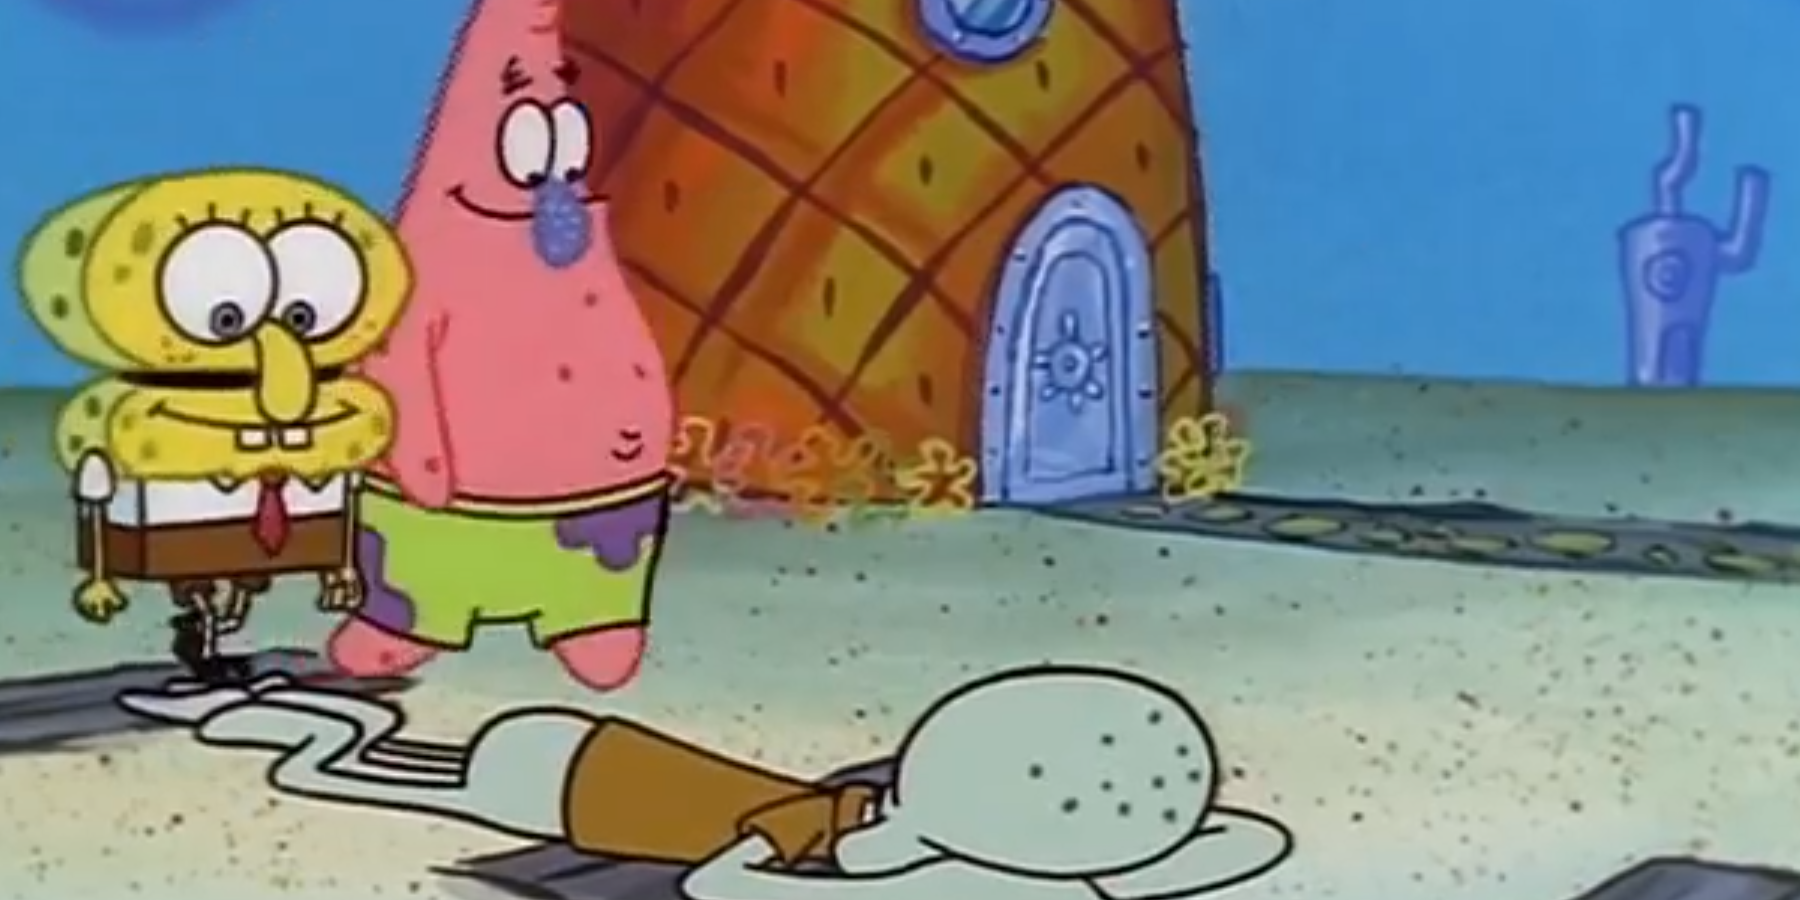 Squidward crying after real estate agent leaves.